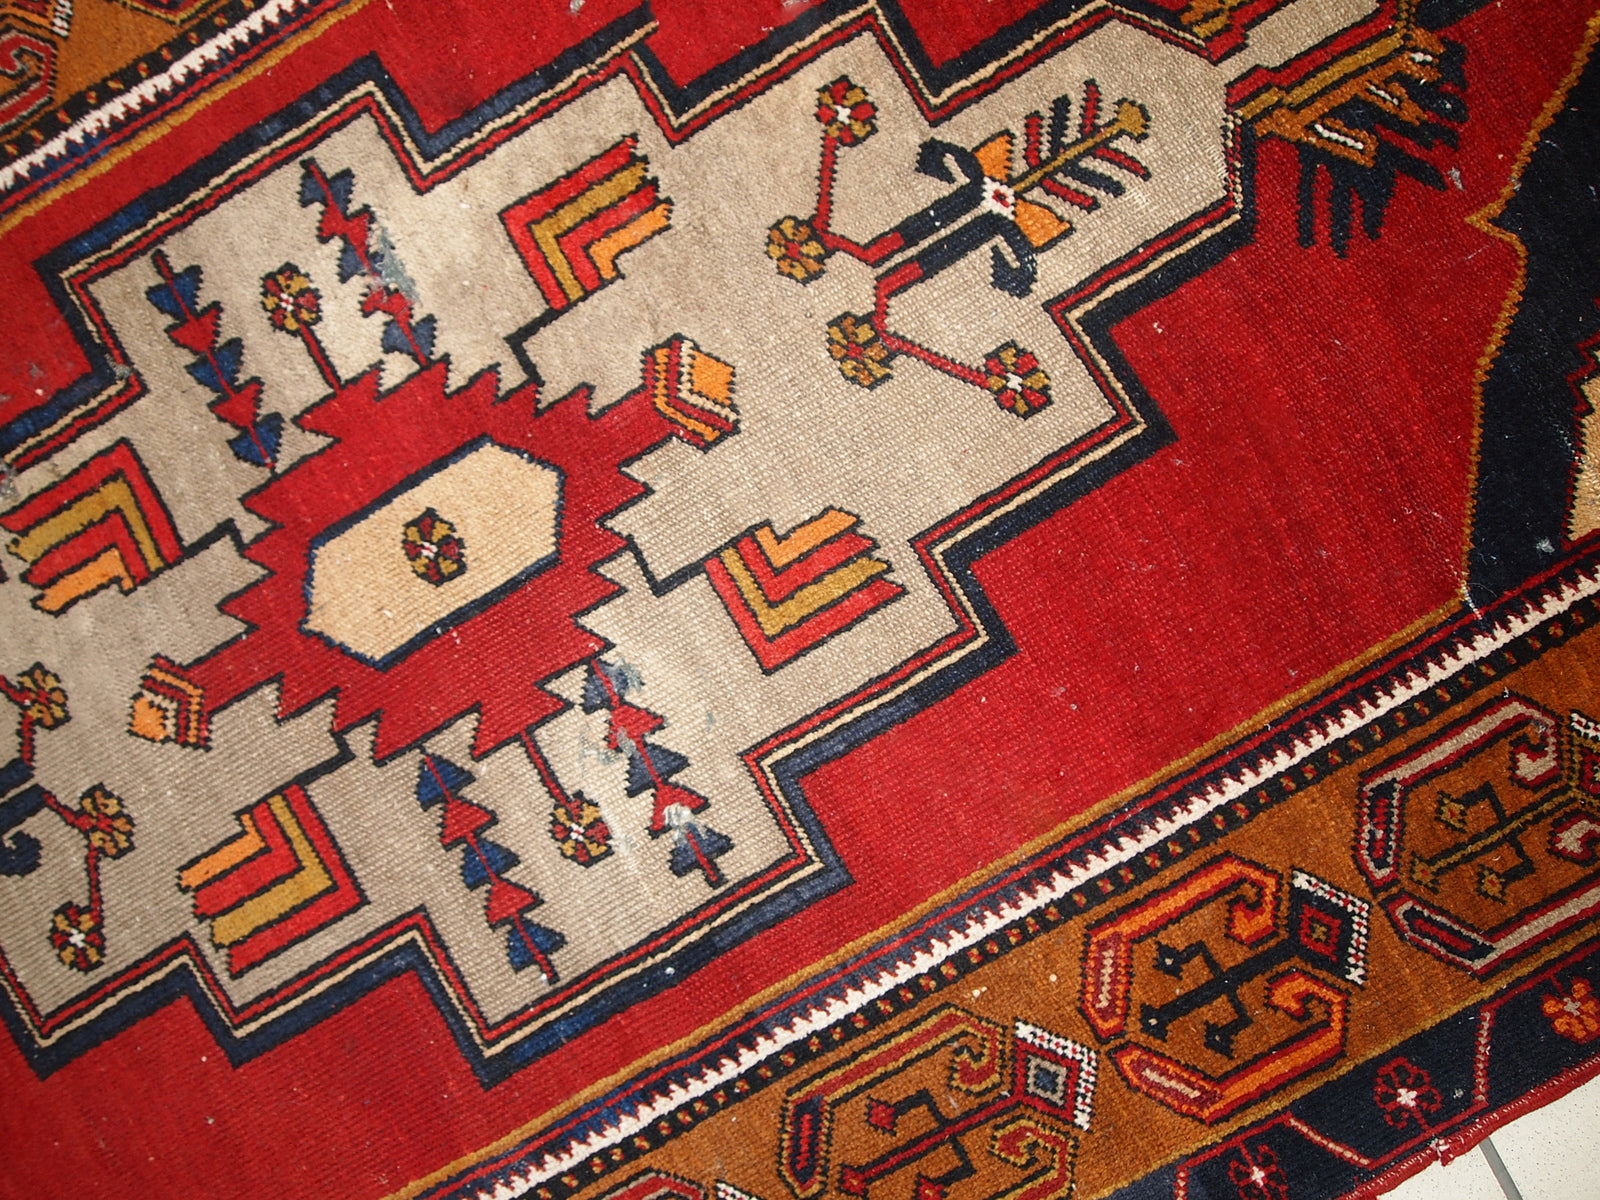 Antique Turkish Anatolian rug in distressed condition. The rug made in traditional Anatolian design in red, yellow, navy blue and grey shades. ​The rug made in the beginning of 20th century.